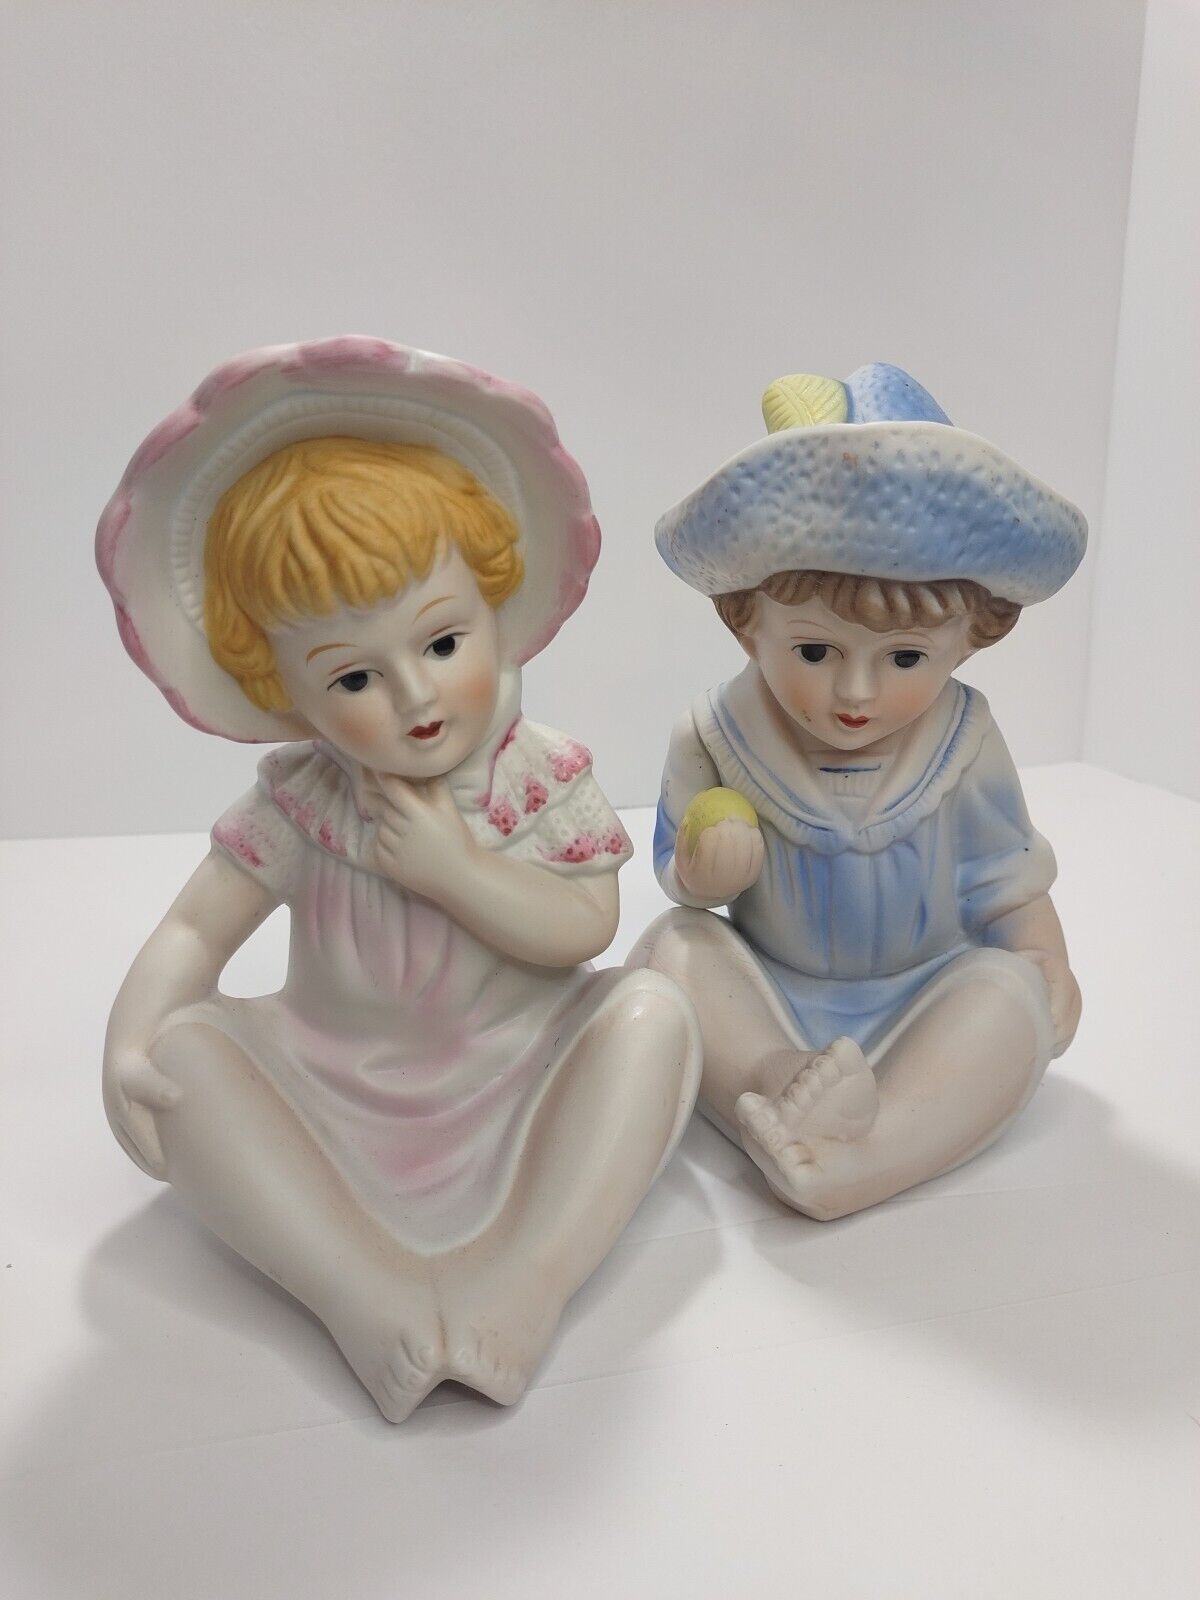 Piano Babies Porcelain Bisque Boy And Girl Figurine Set Rare Vintage By Le Croy